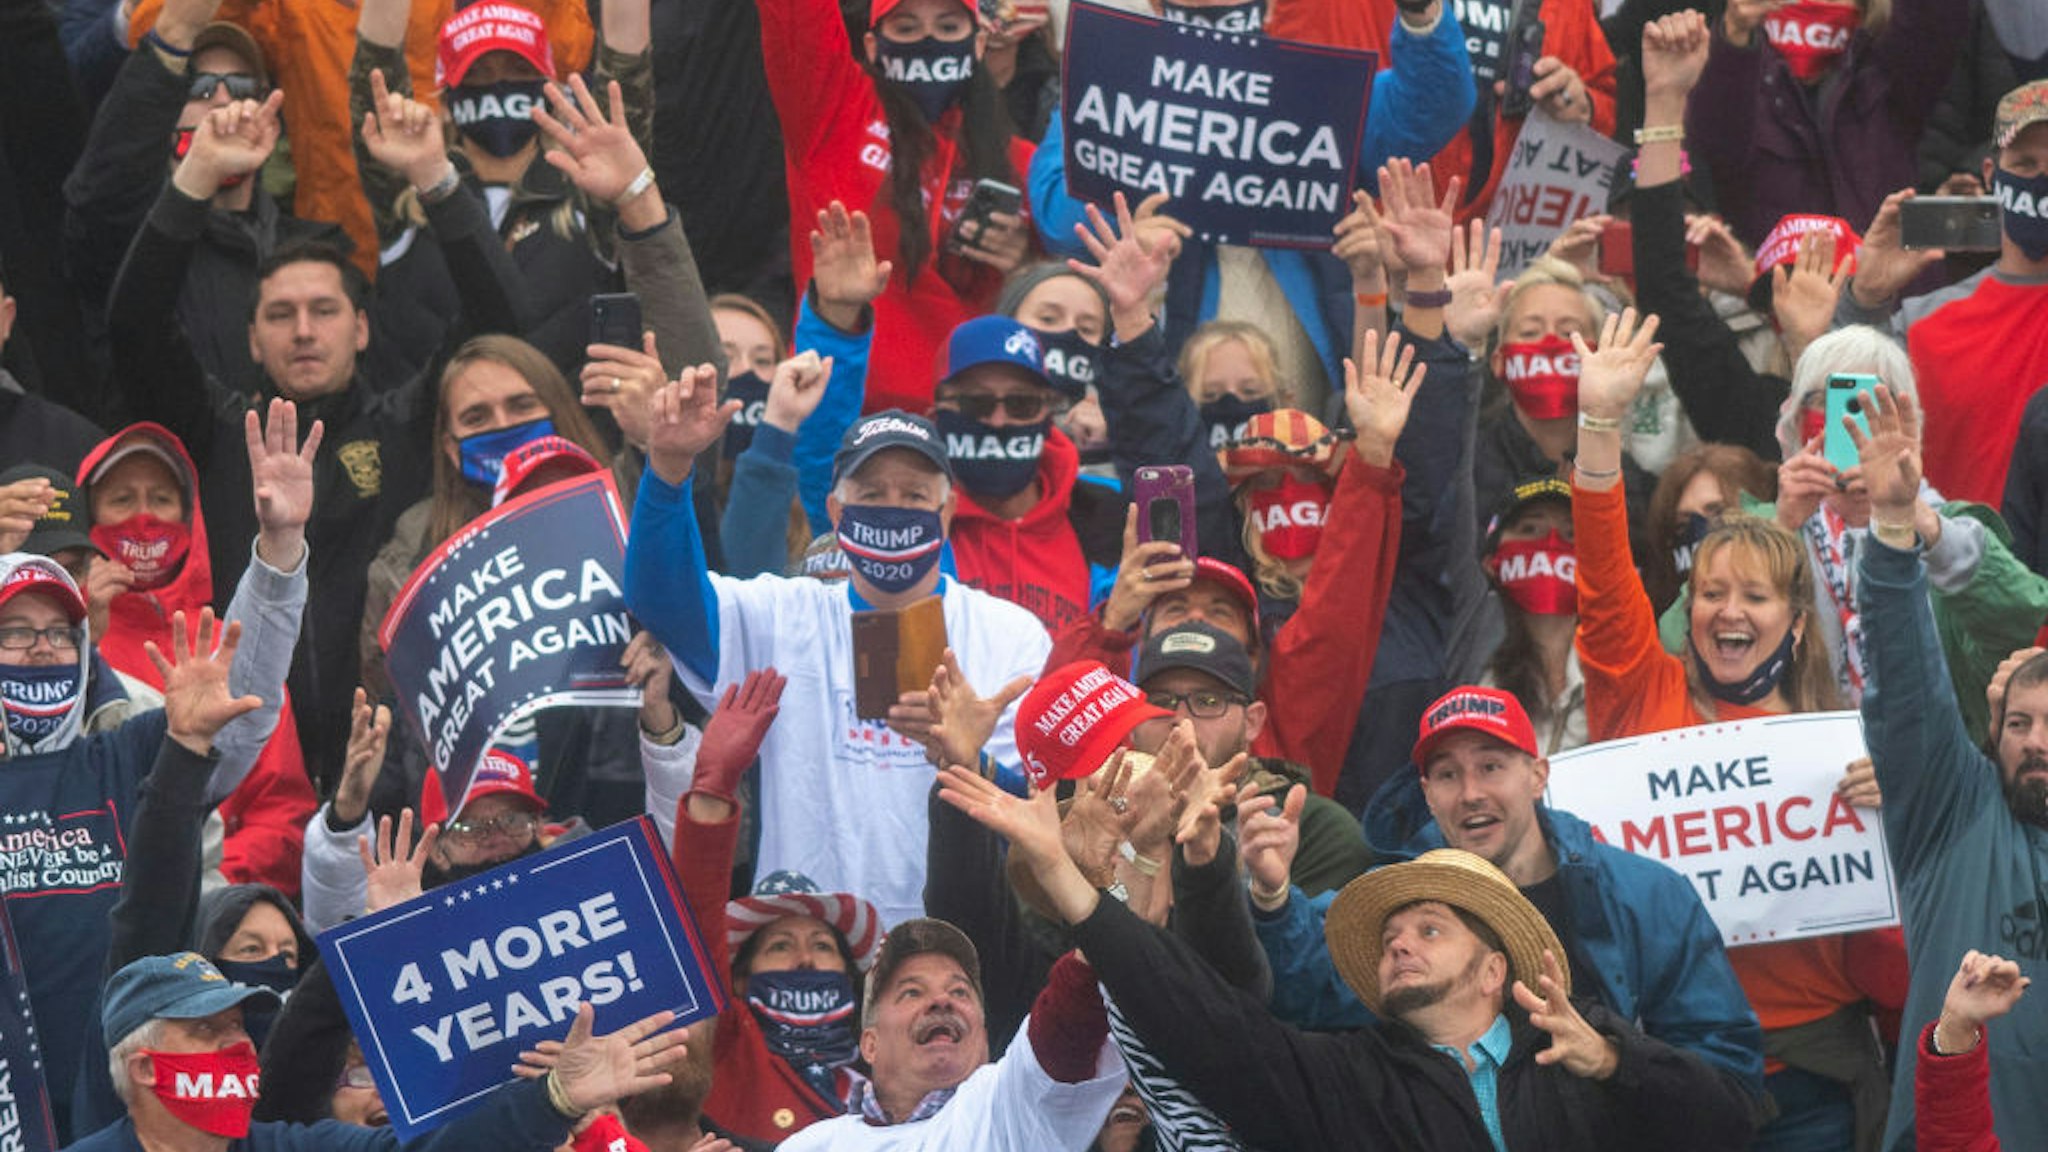 Supporters strain to catch a Make America Great Again hat thrown by President Donald Trump during a rally on October 26, 2020 in Lititz, Pennsylvania.